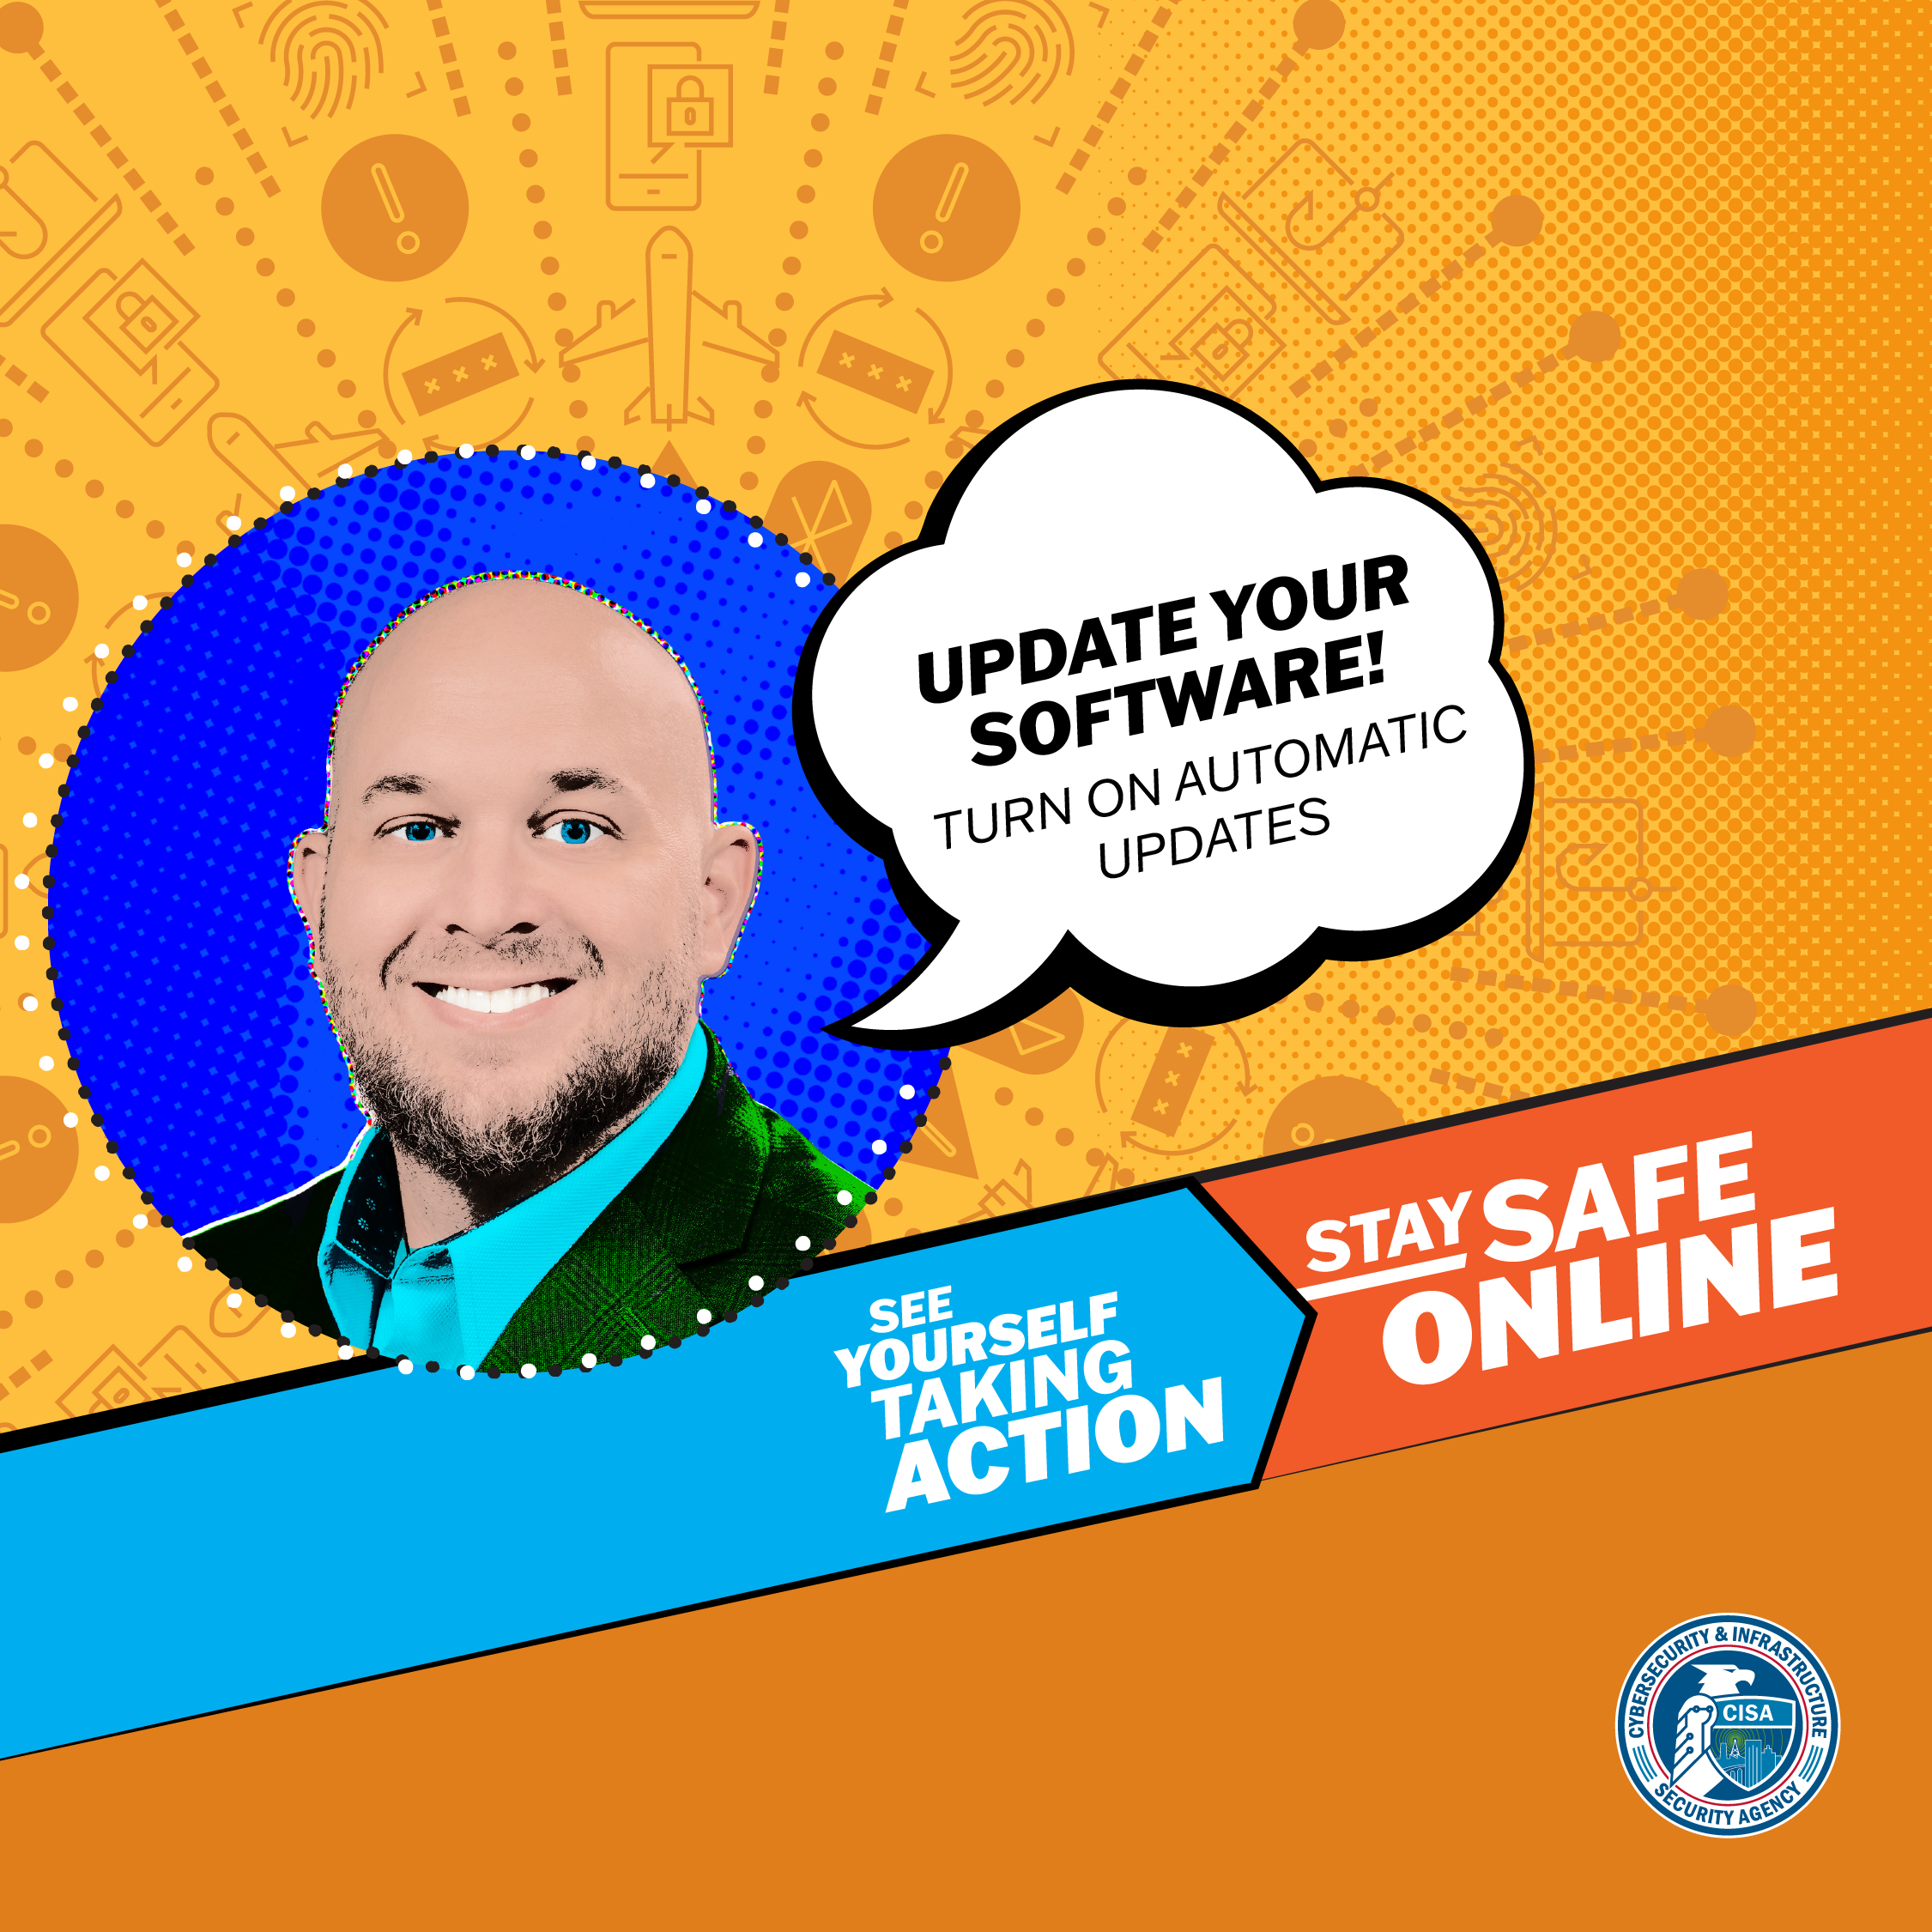 Update Your Software - Turn on Automatic Updates. See Yourself Taking Action. Stay Safe Online